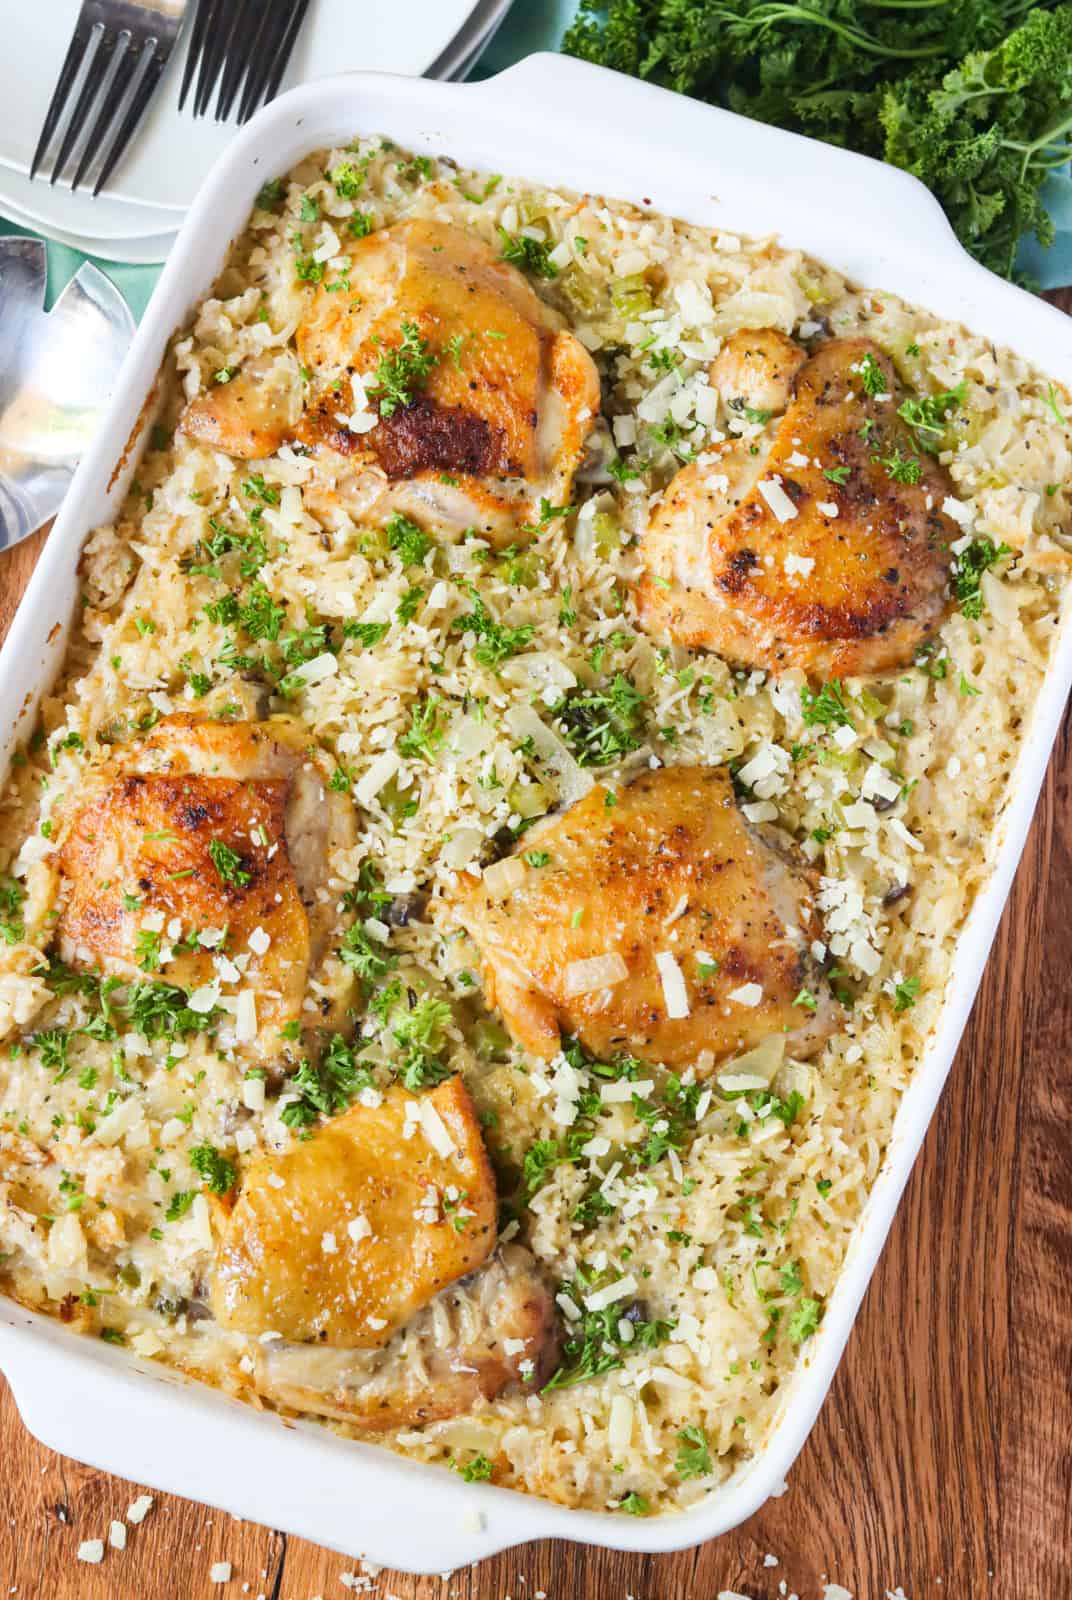 Chicken and Rice Casserole - Immaculate Bites